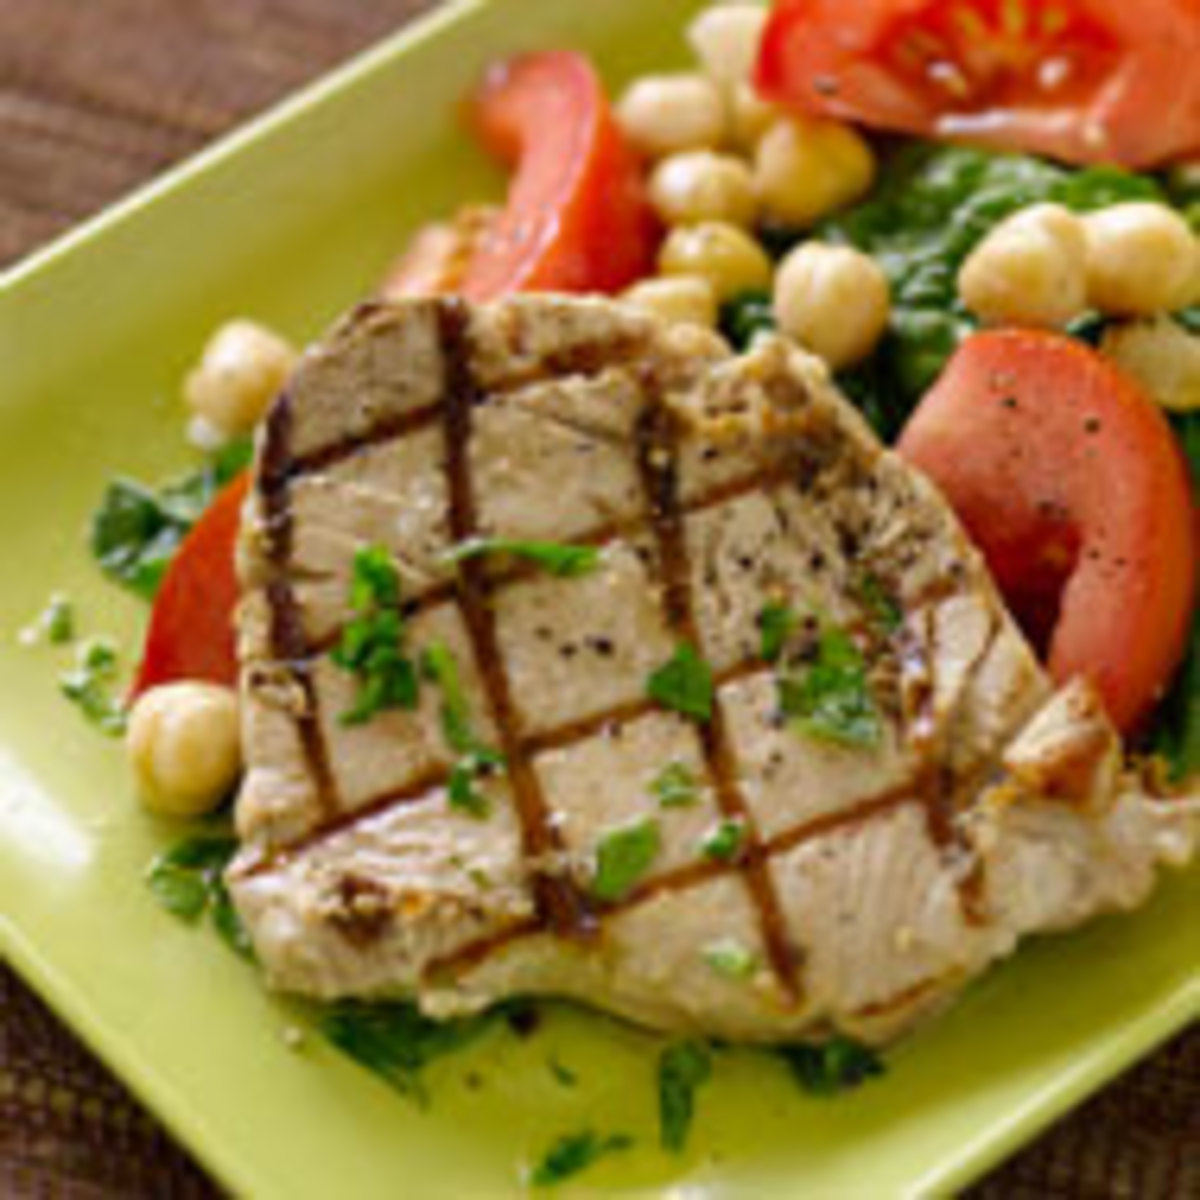 Grilled Tuna With Chickpea and Spinach Salad